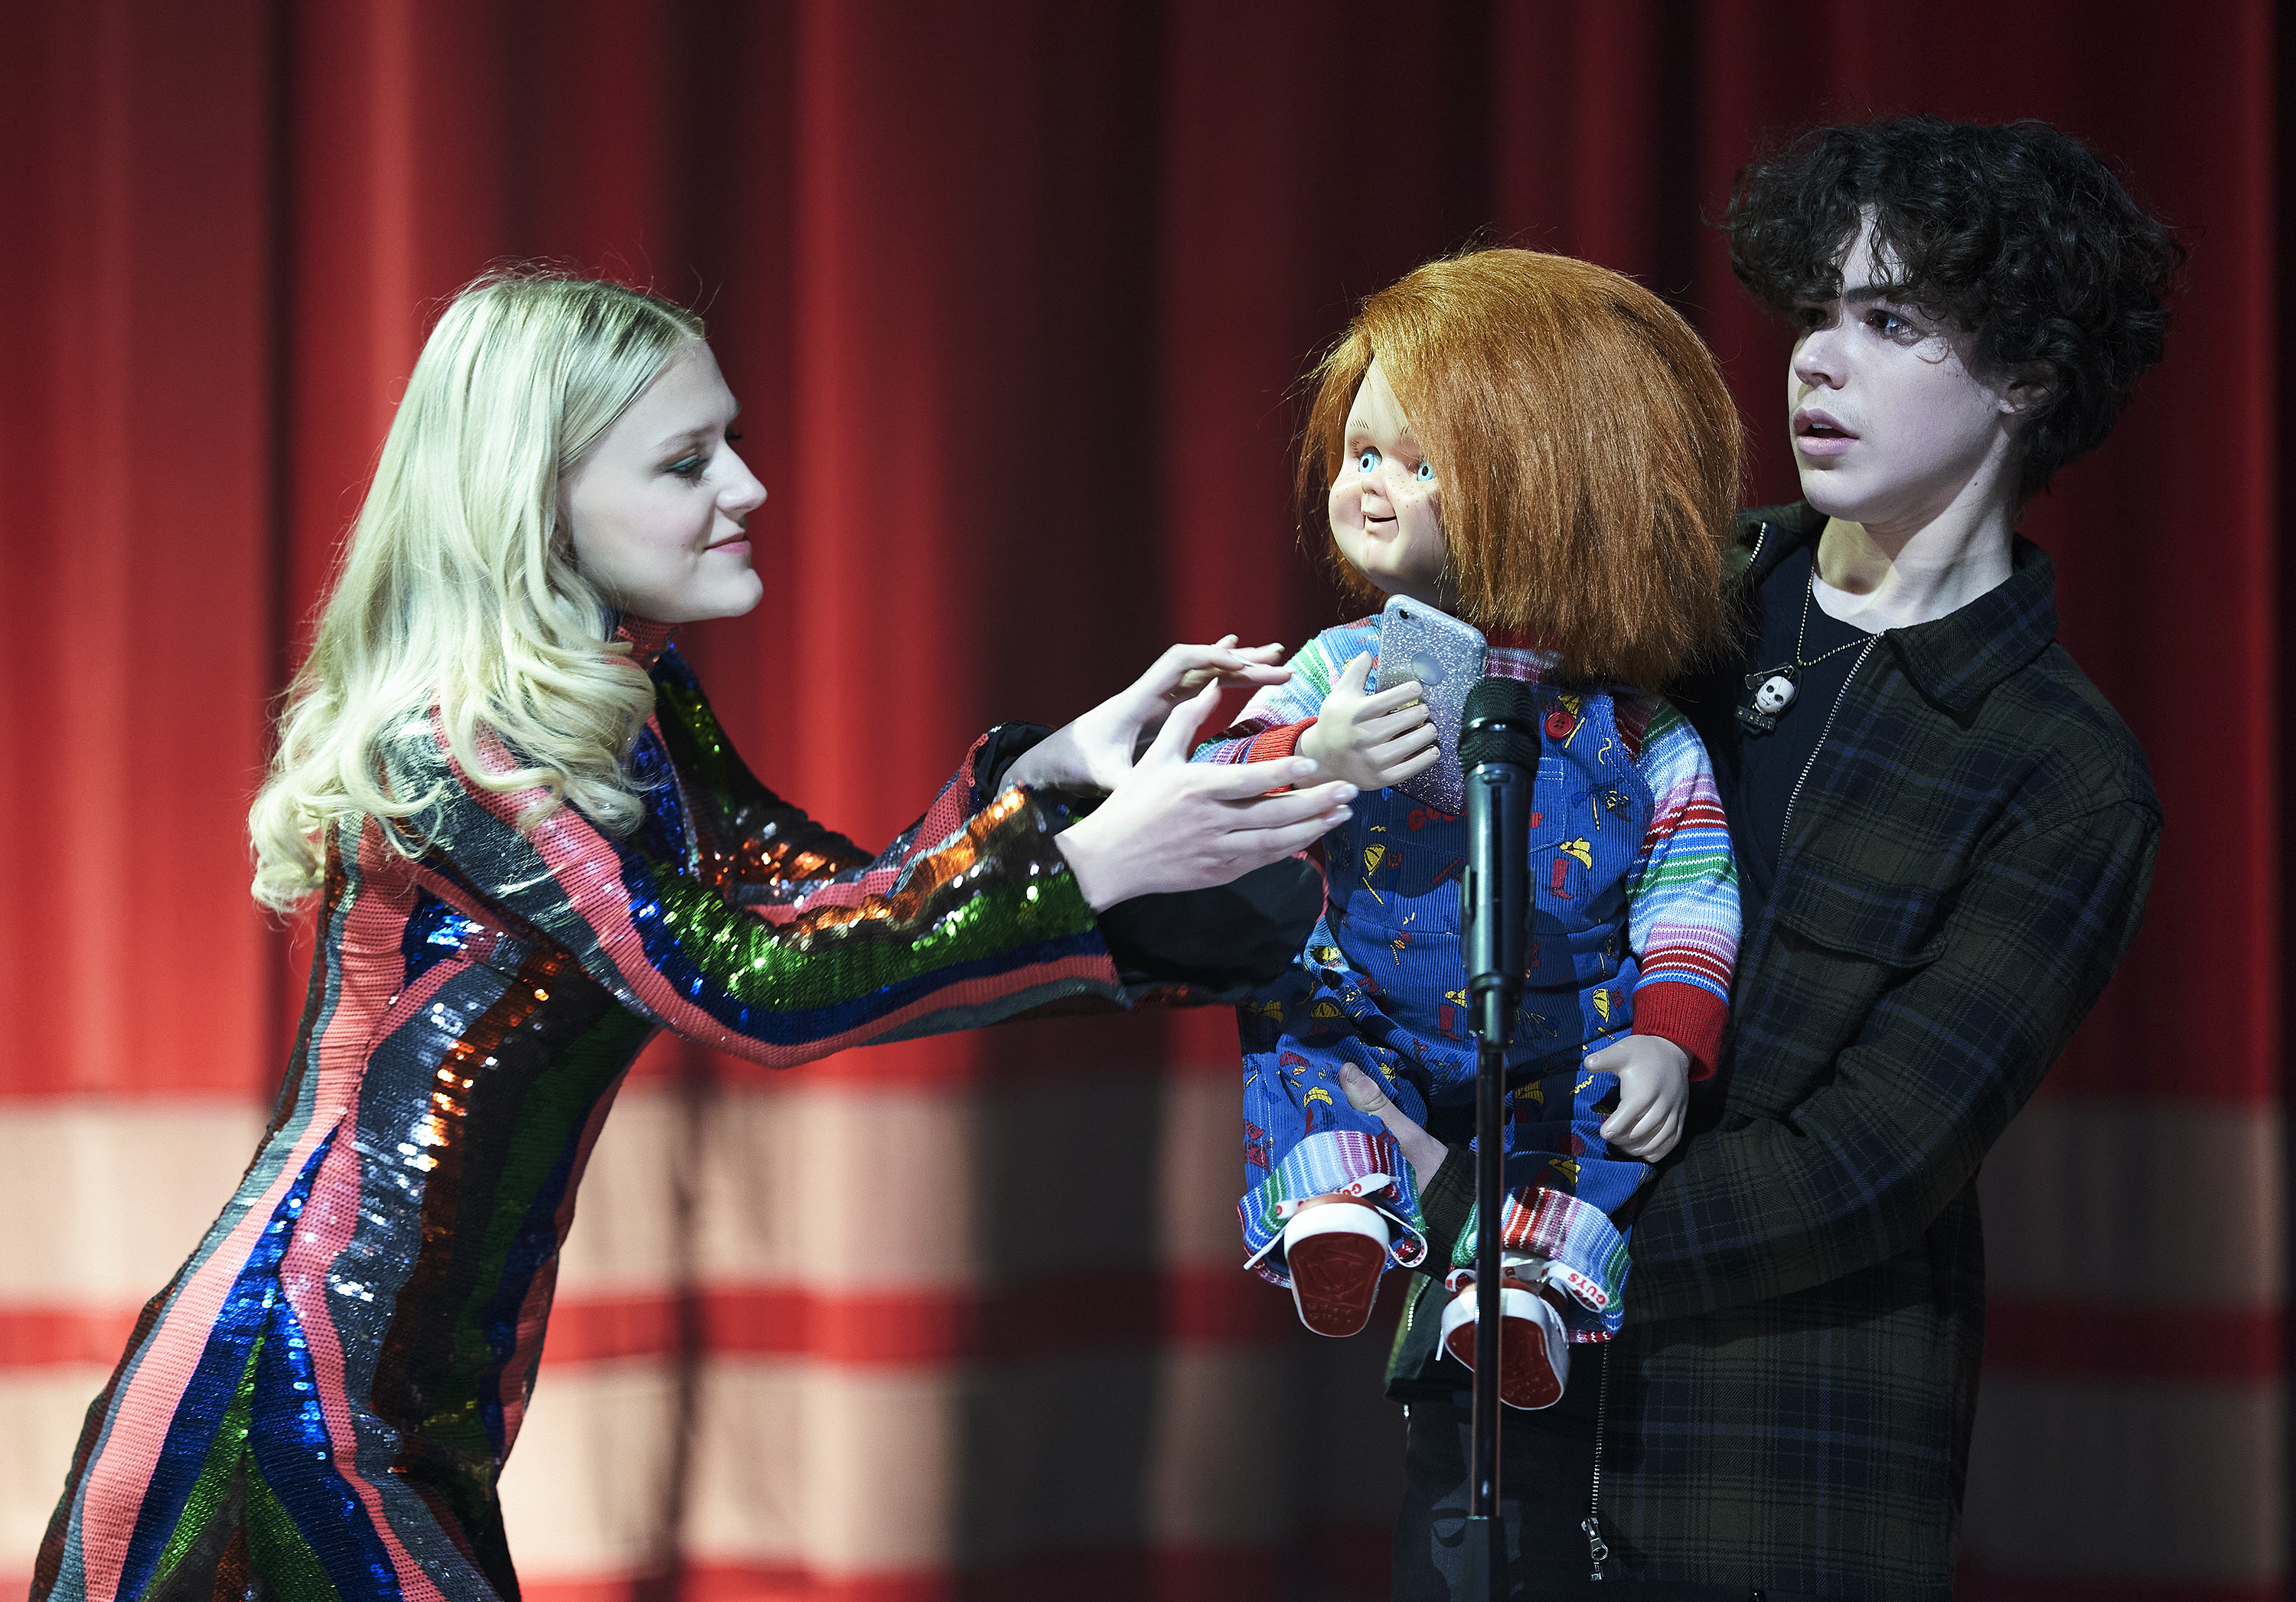 Chucky steals a cell phone at a talent show